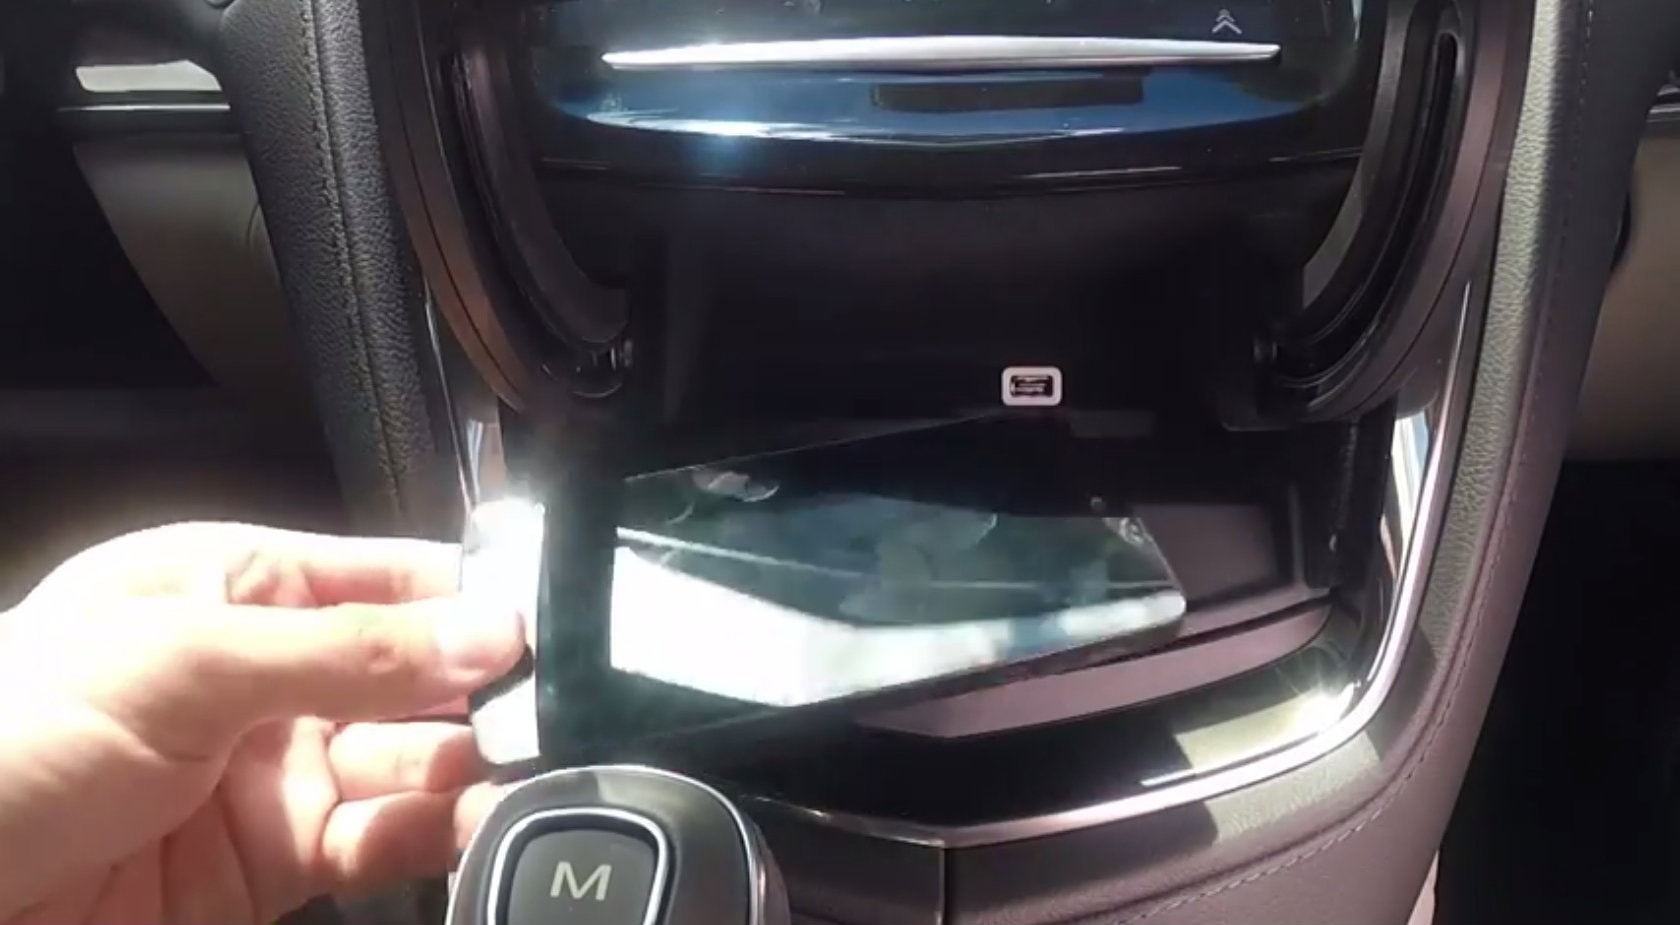 wireless-charging-for-smartphones-now-available-on-the-2015-cadillac-ats-video-84481_1